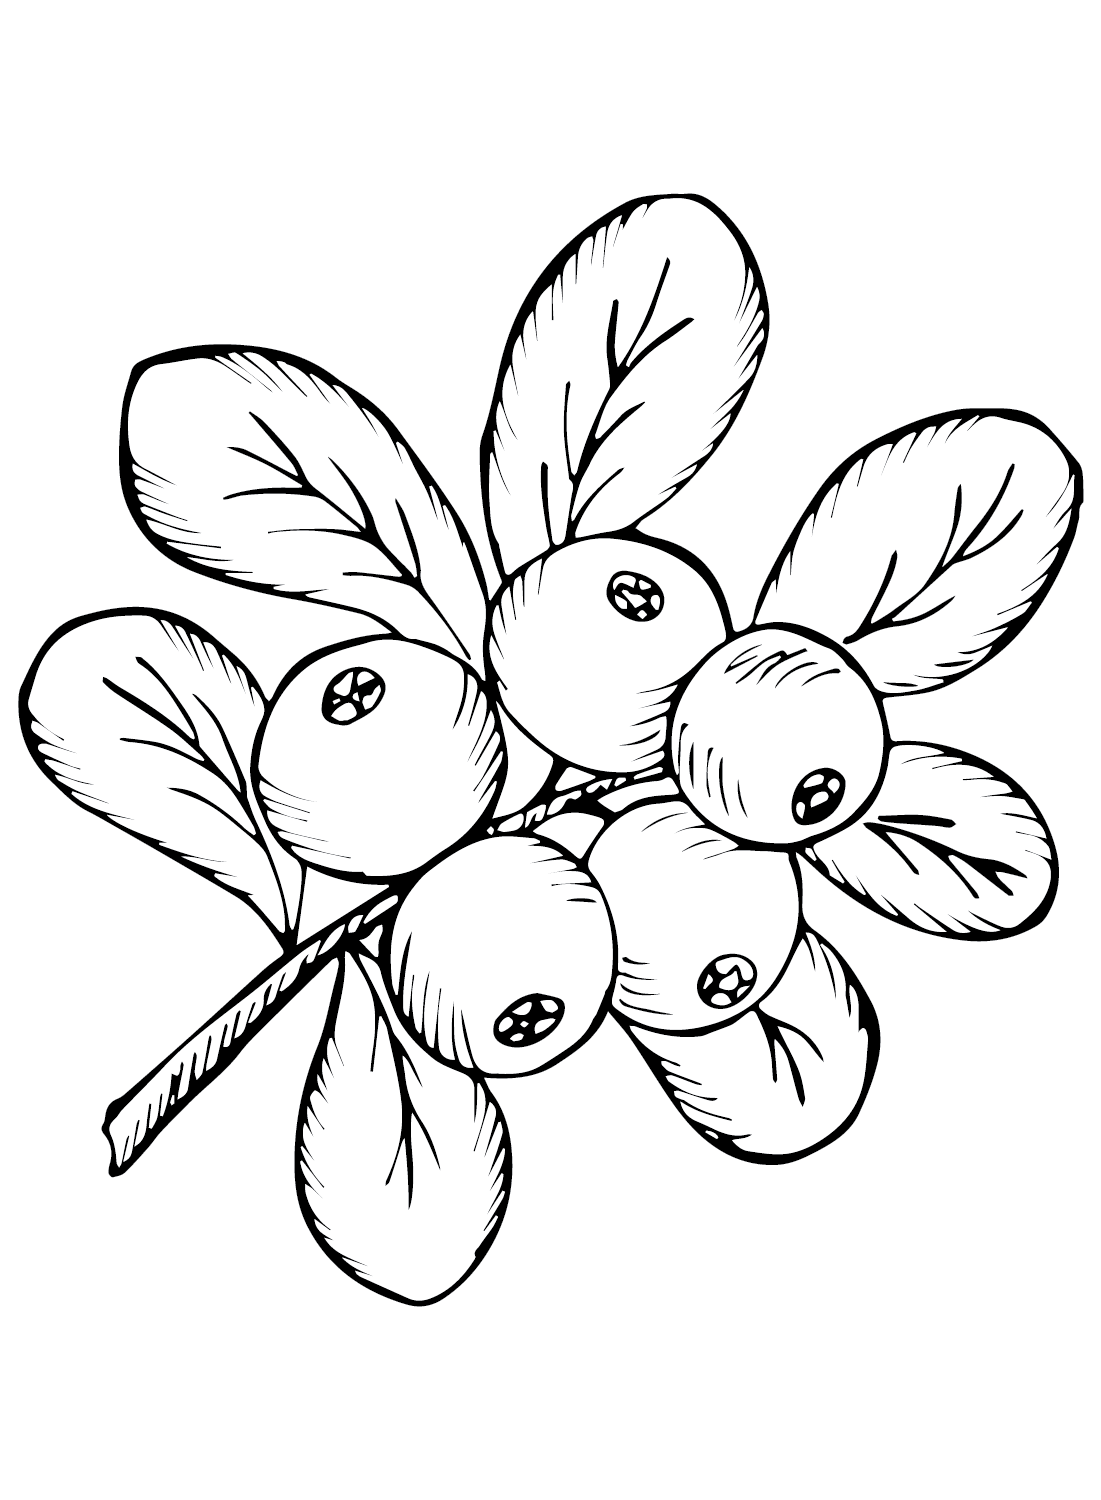 Cranberries Coloring Page